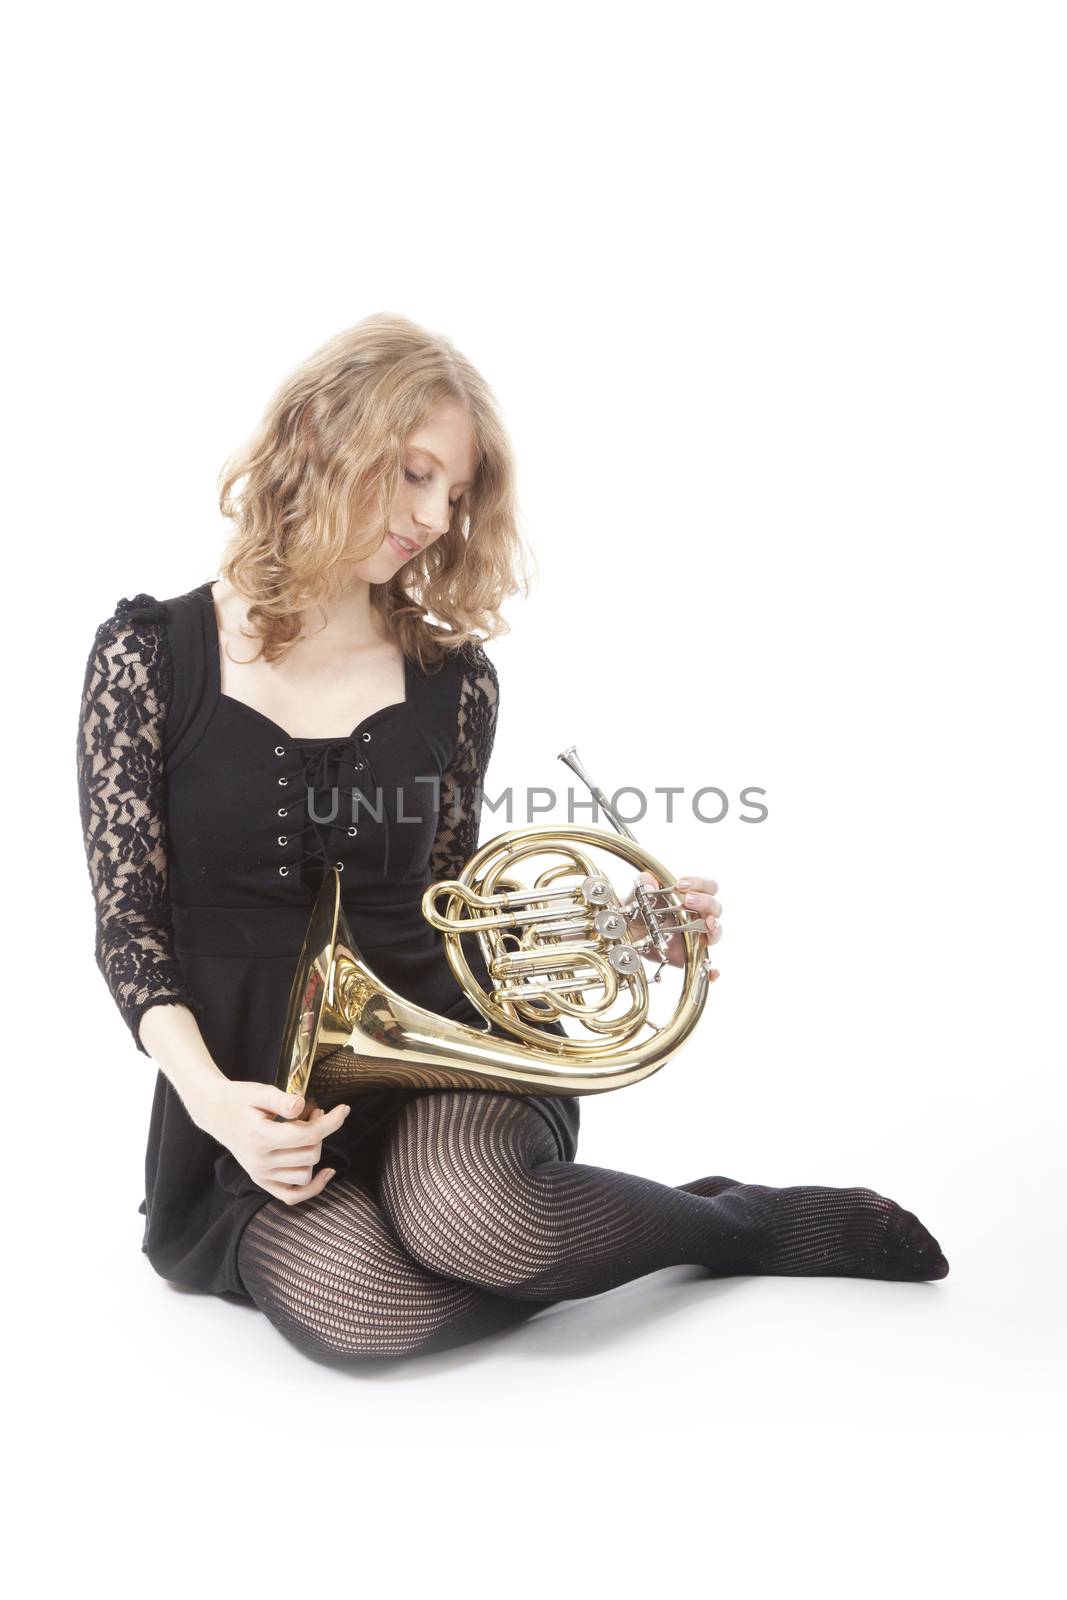 young pretty woman sitting and holding french horn by ahavelaar